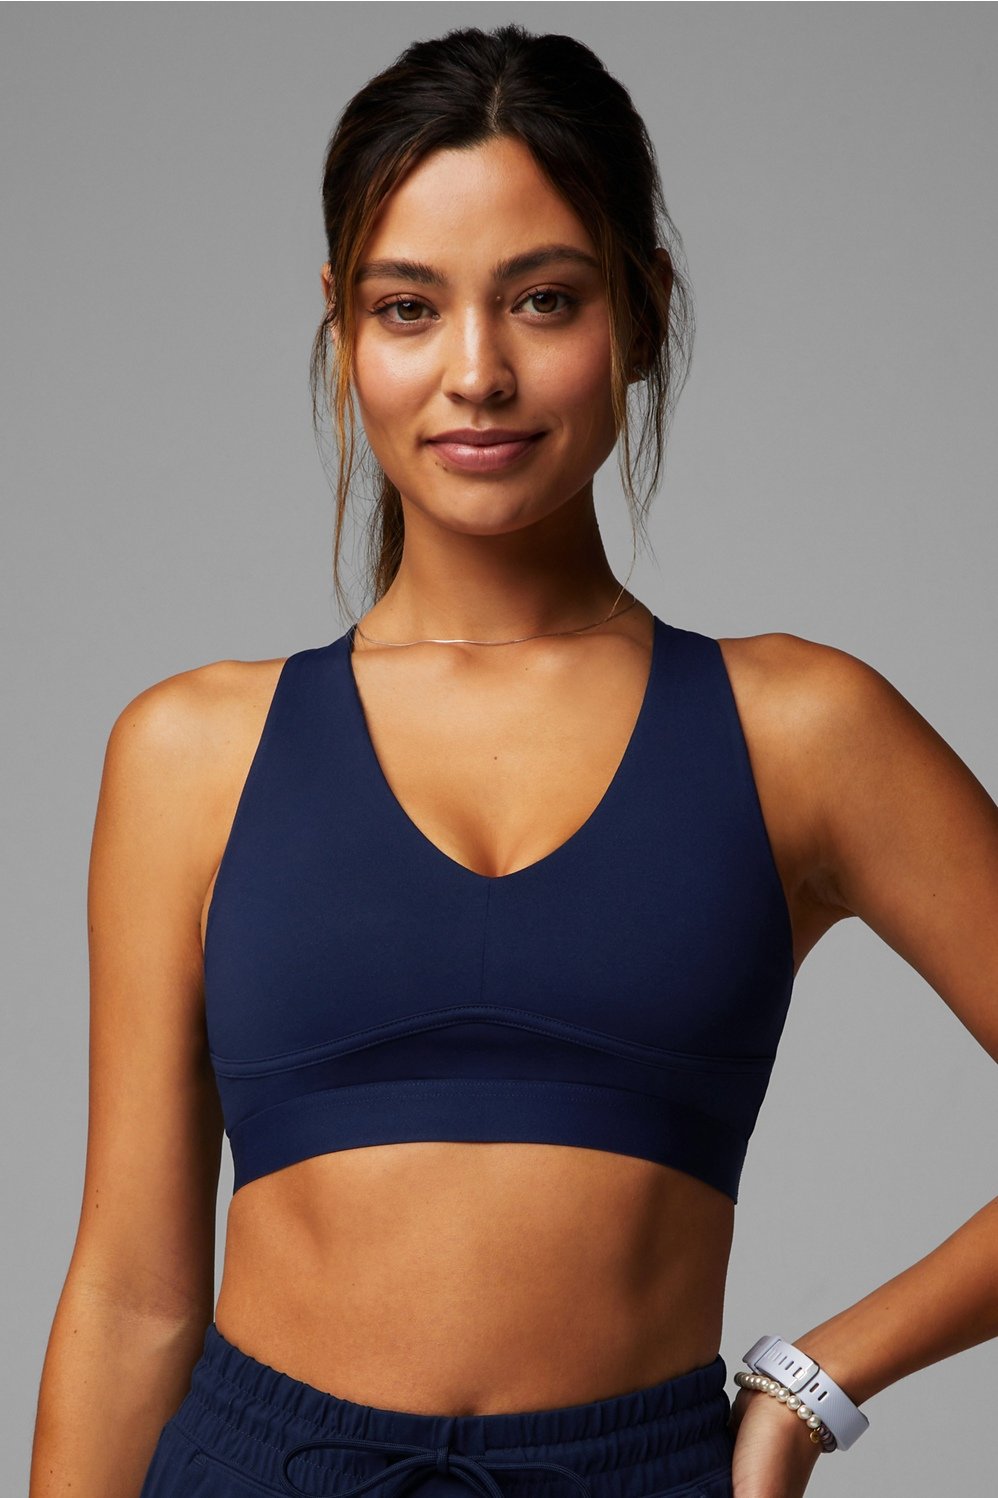 All Day Every Day Low Impact Bra - Fabletics